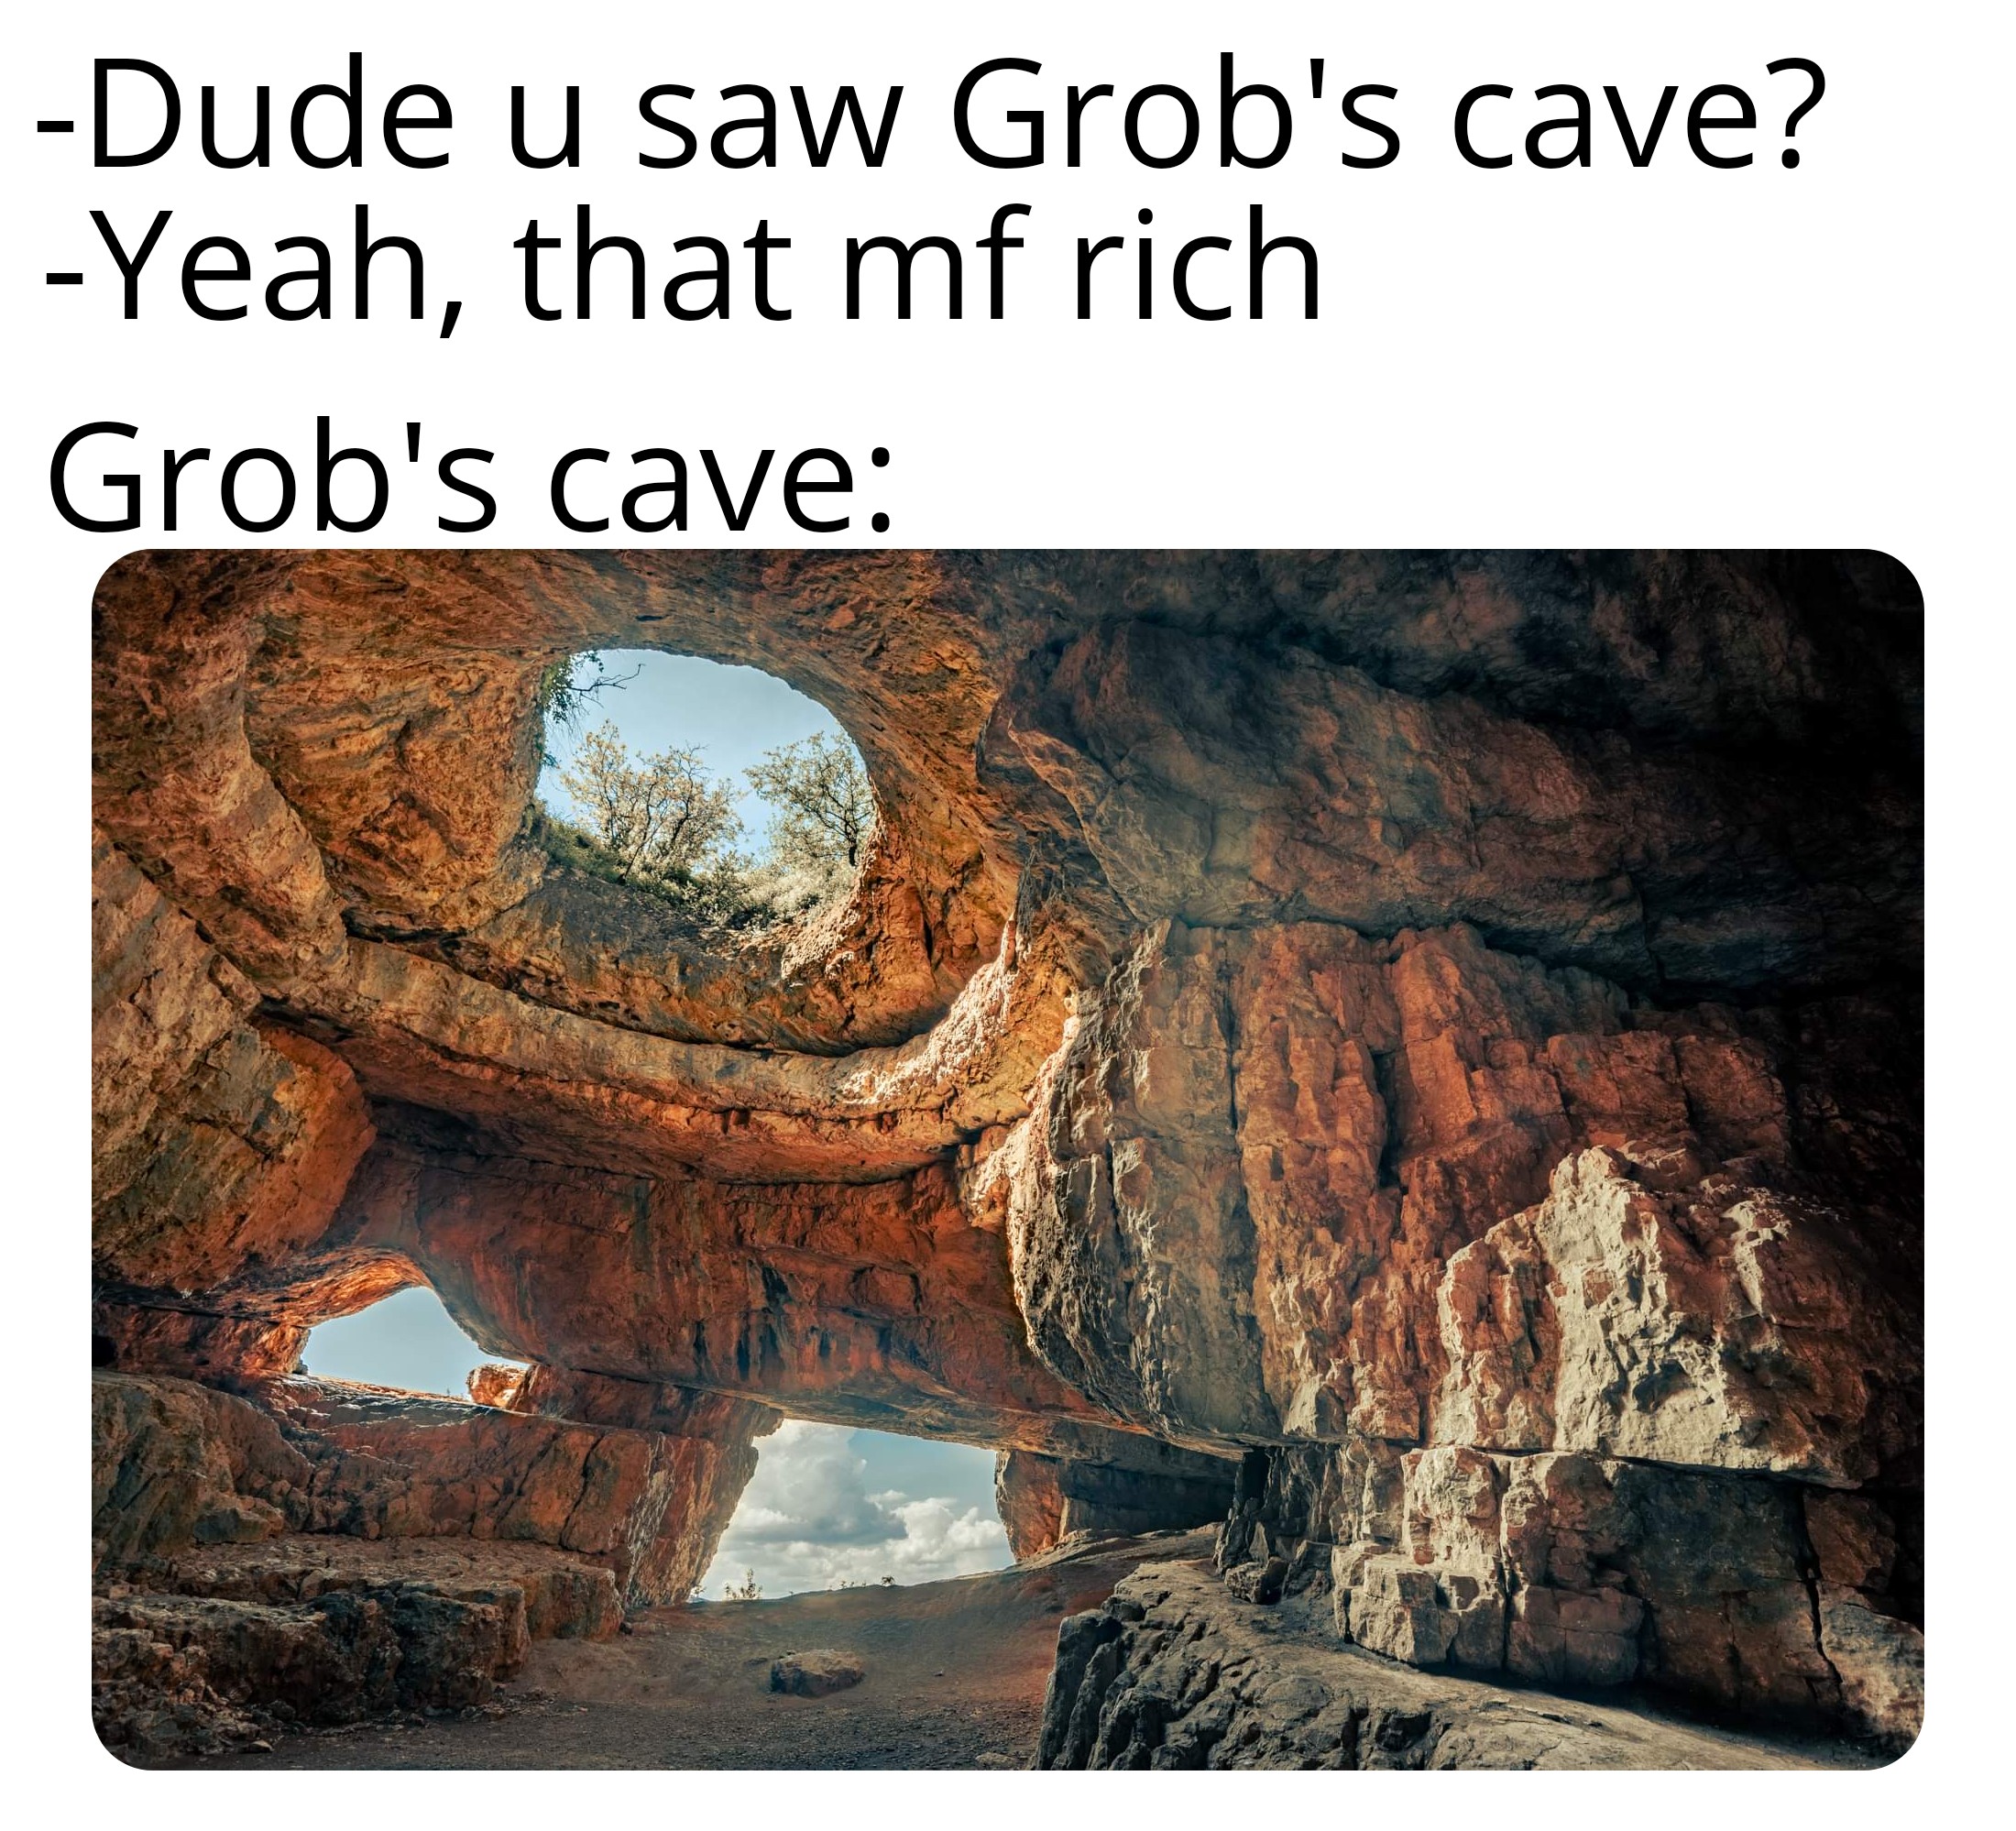 gaming memes - rock - Dude u saw Grob's cave? Yeah, that mf rich Grob's cave